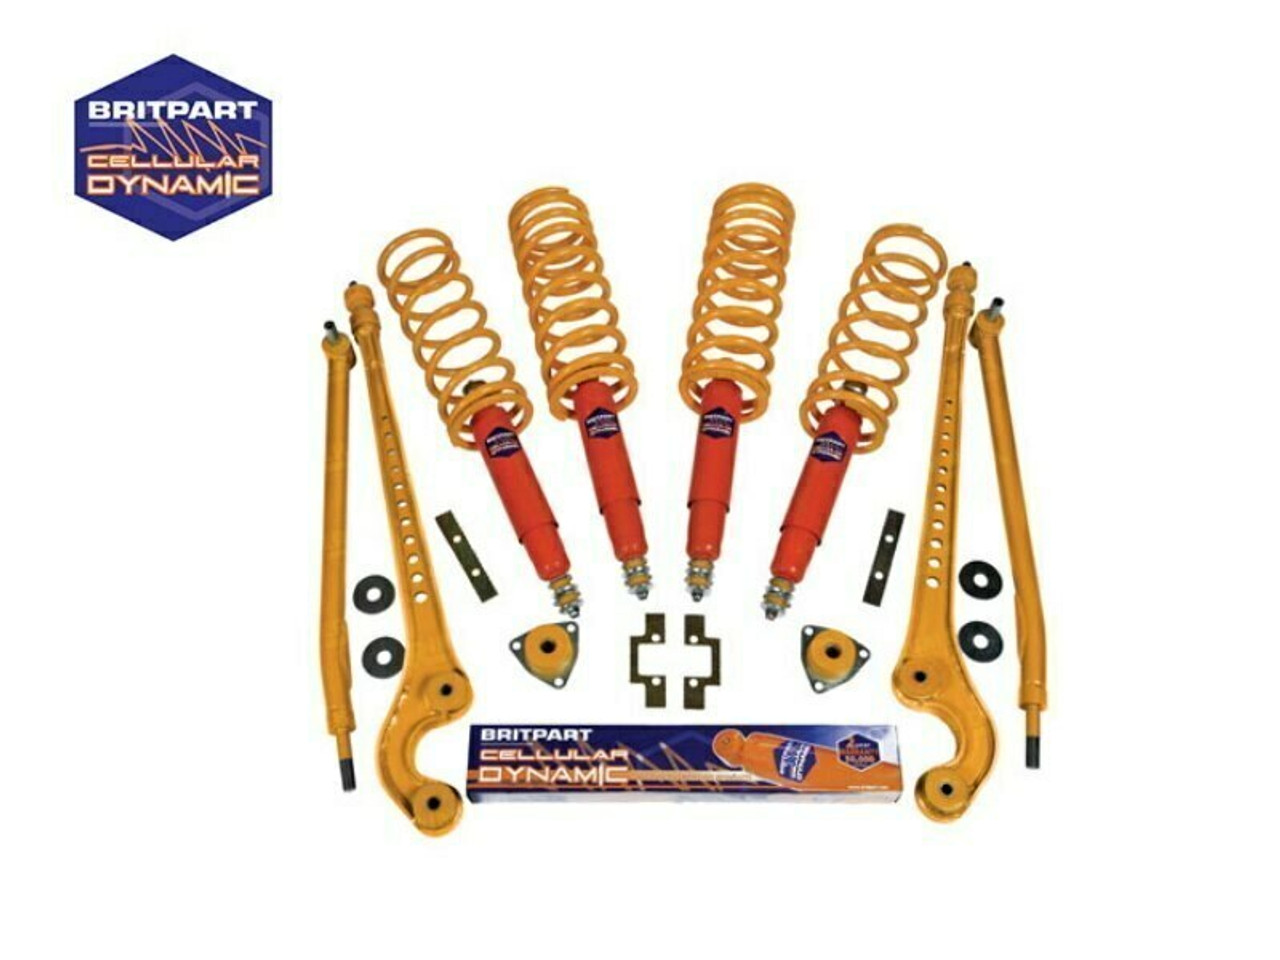 Britpart Cellular Dynamic Medium Duty 40mm Lift Full Suspension Kit For Def 90 From 1994, RRC From 1986 and D1